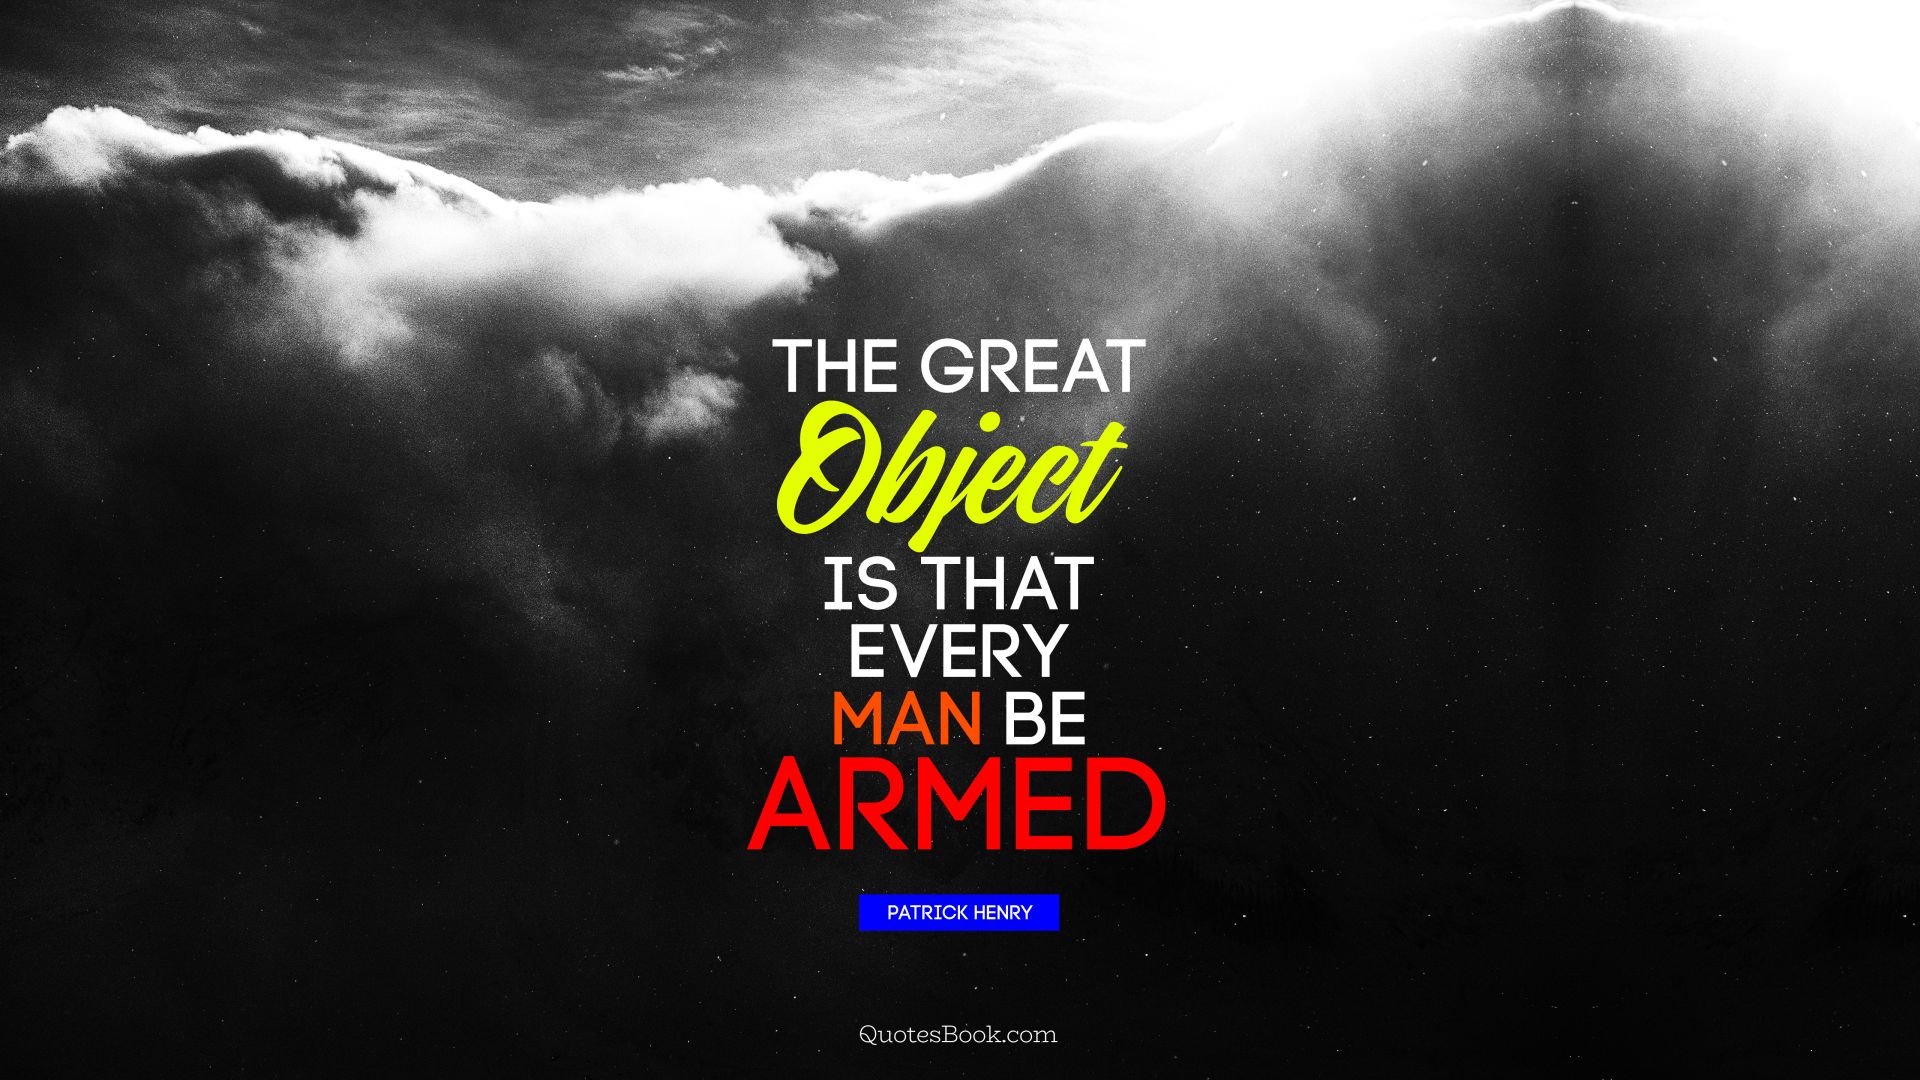 The great object is that every man be armed. - Quote by Patrick Henry